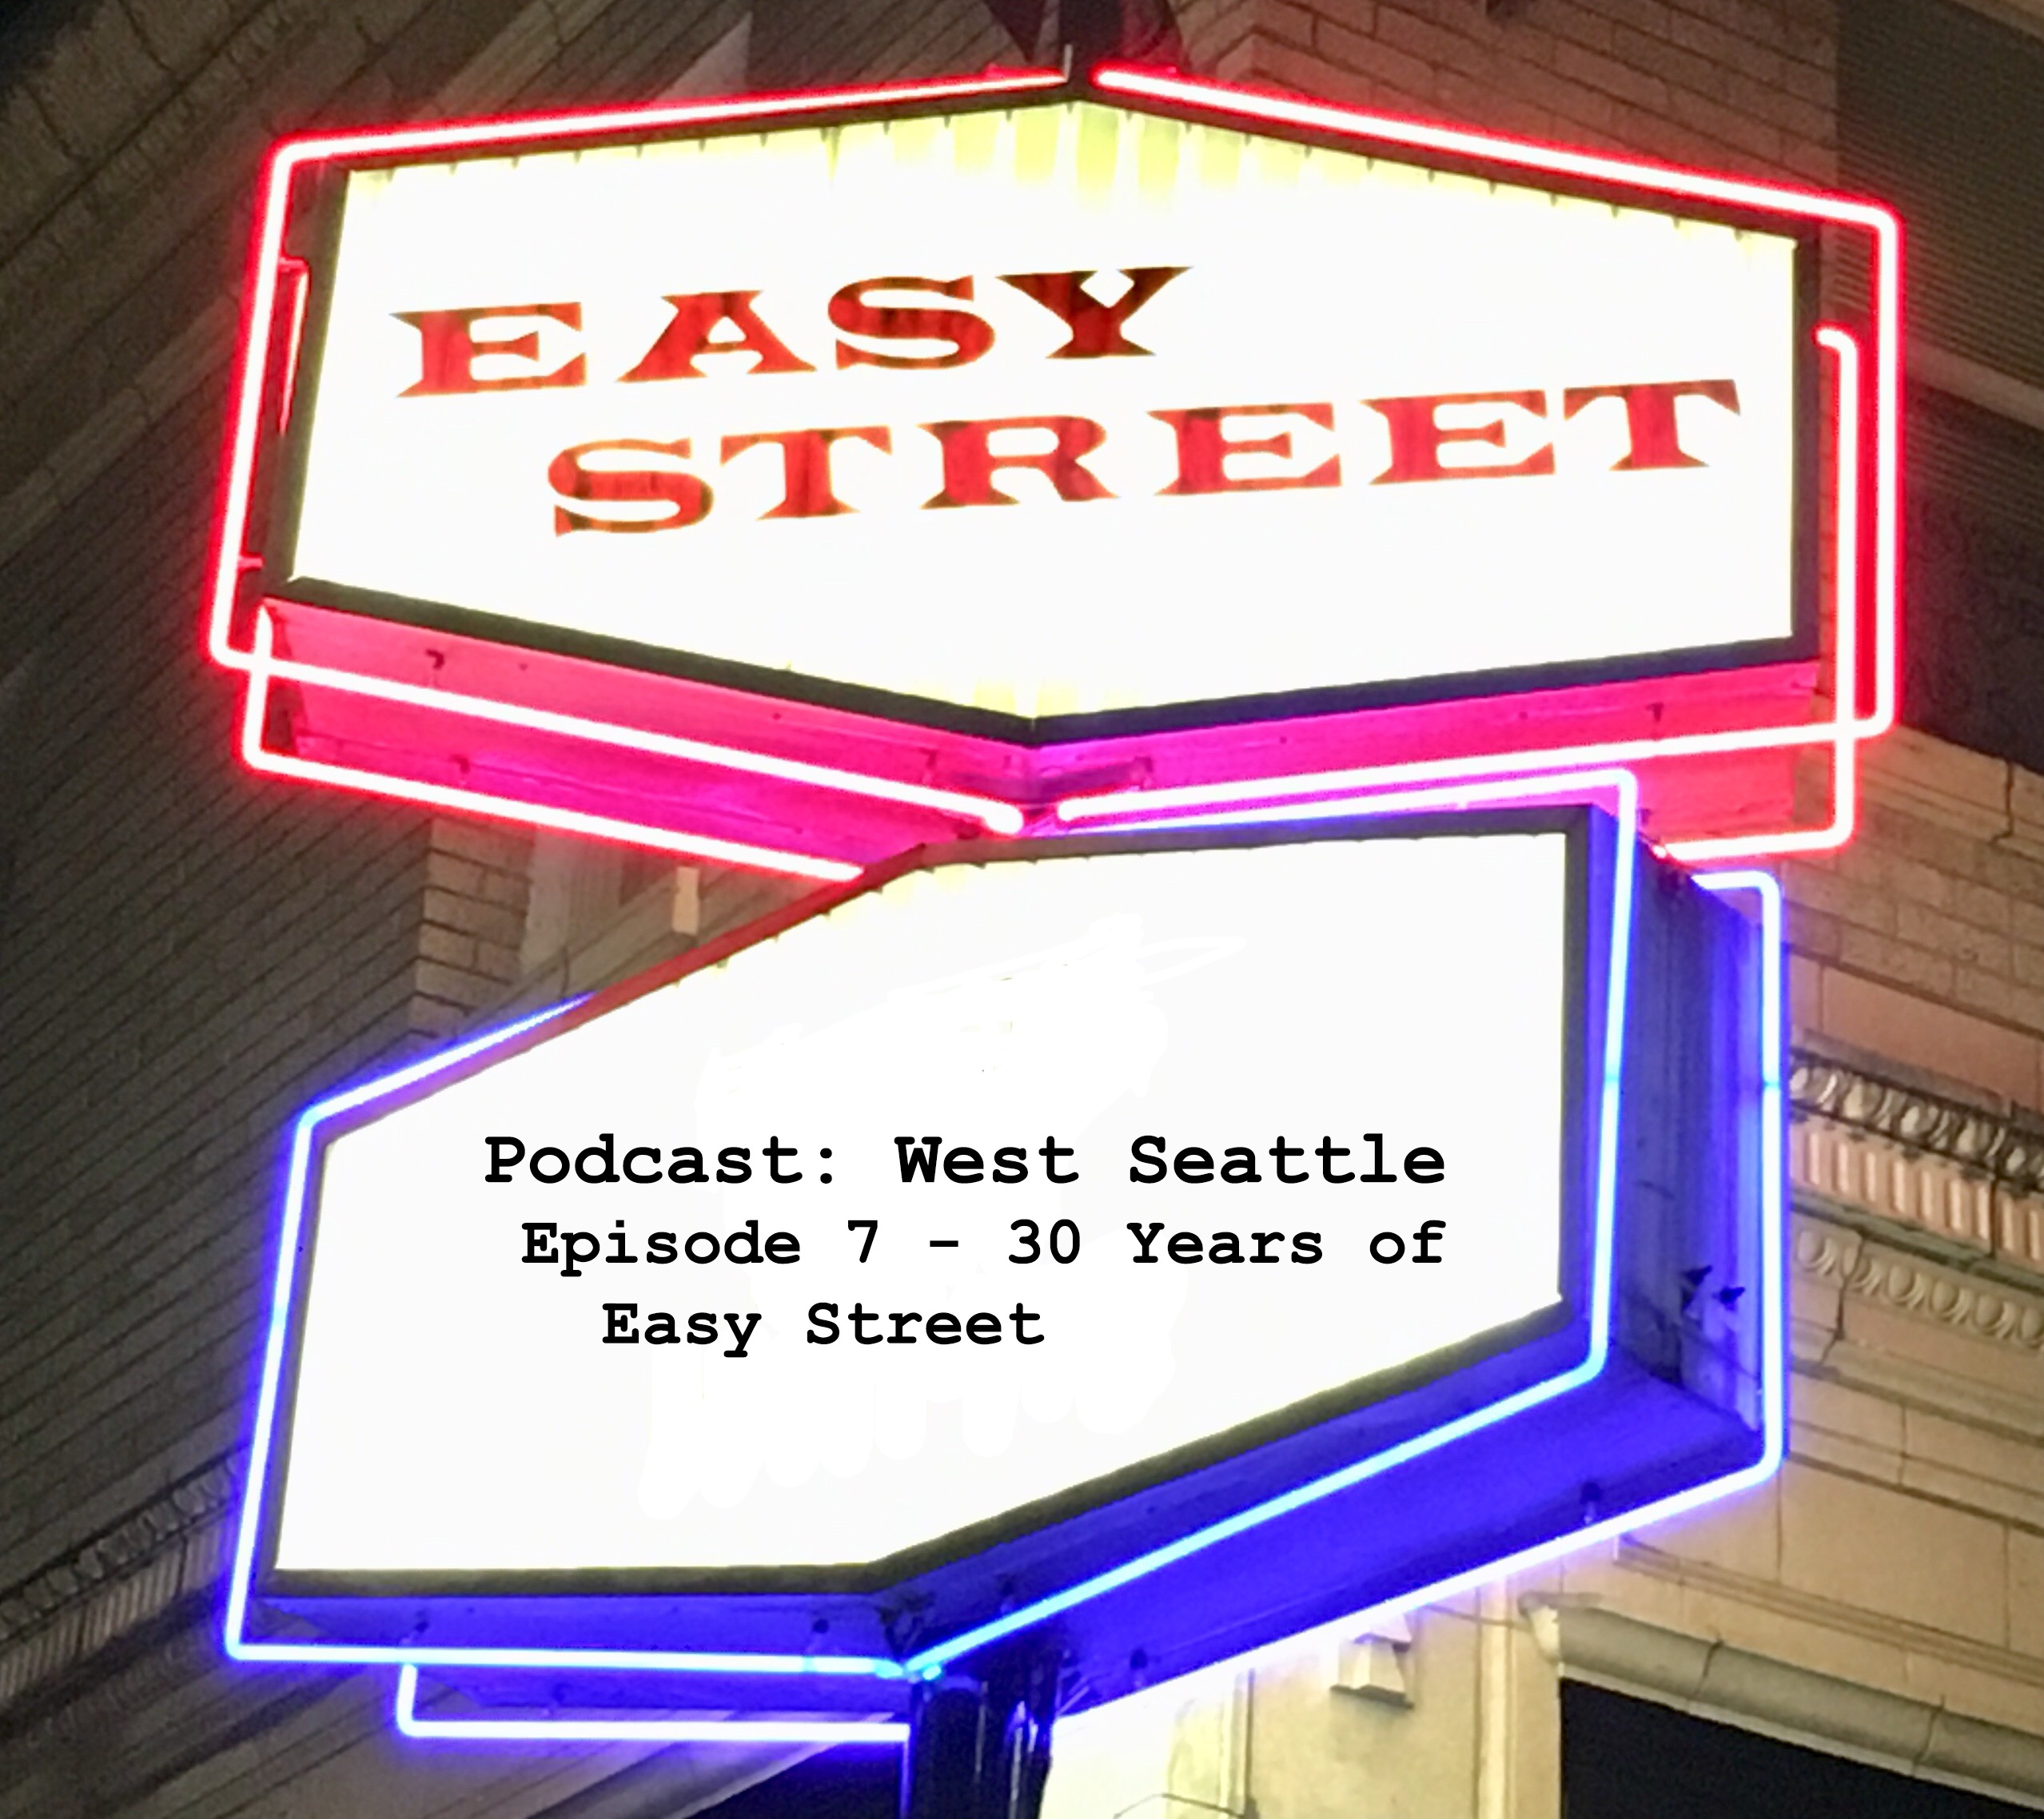 Episode 7 - 30 Years of Easy Street